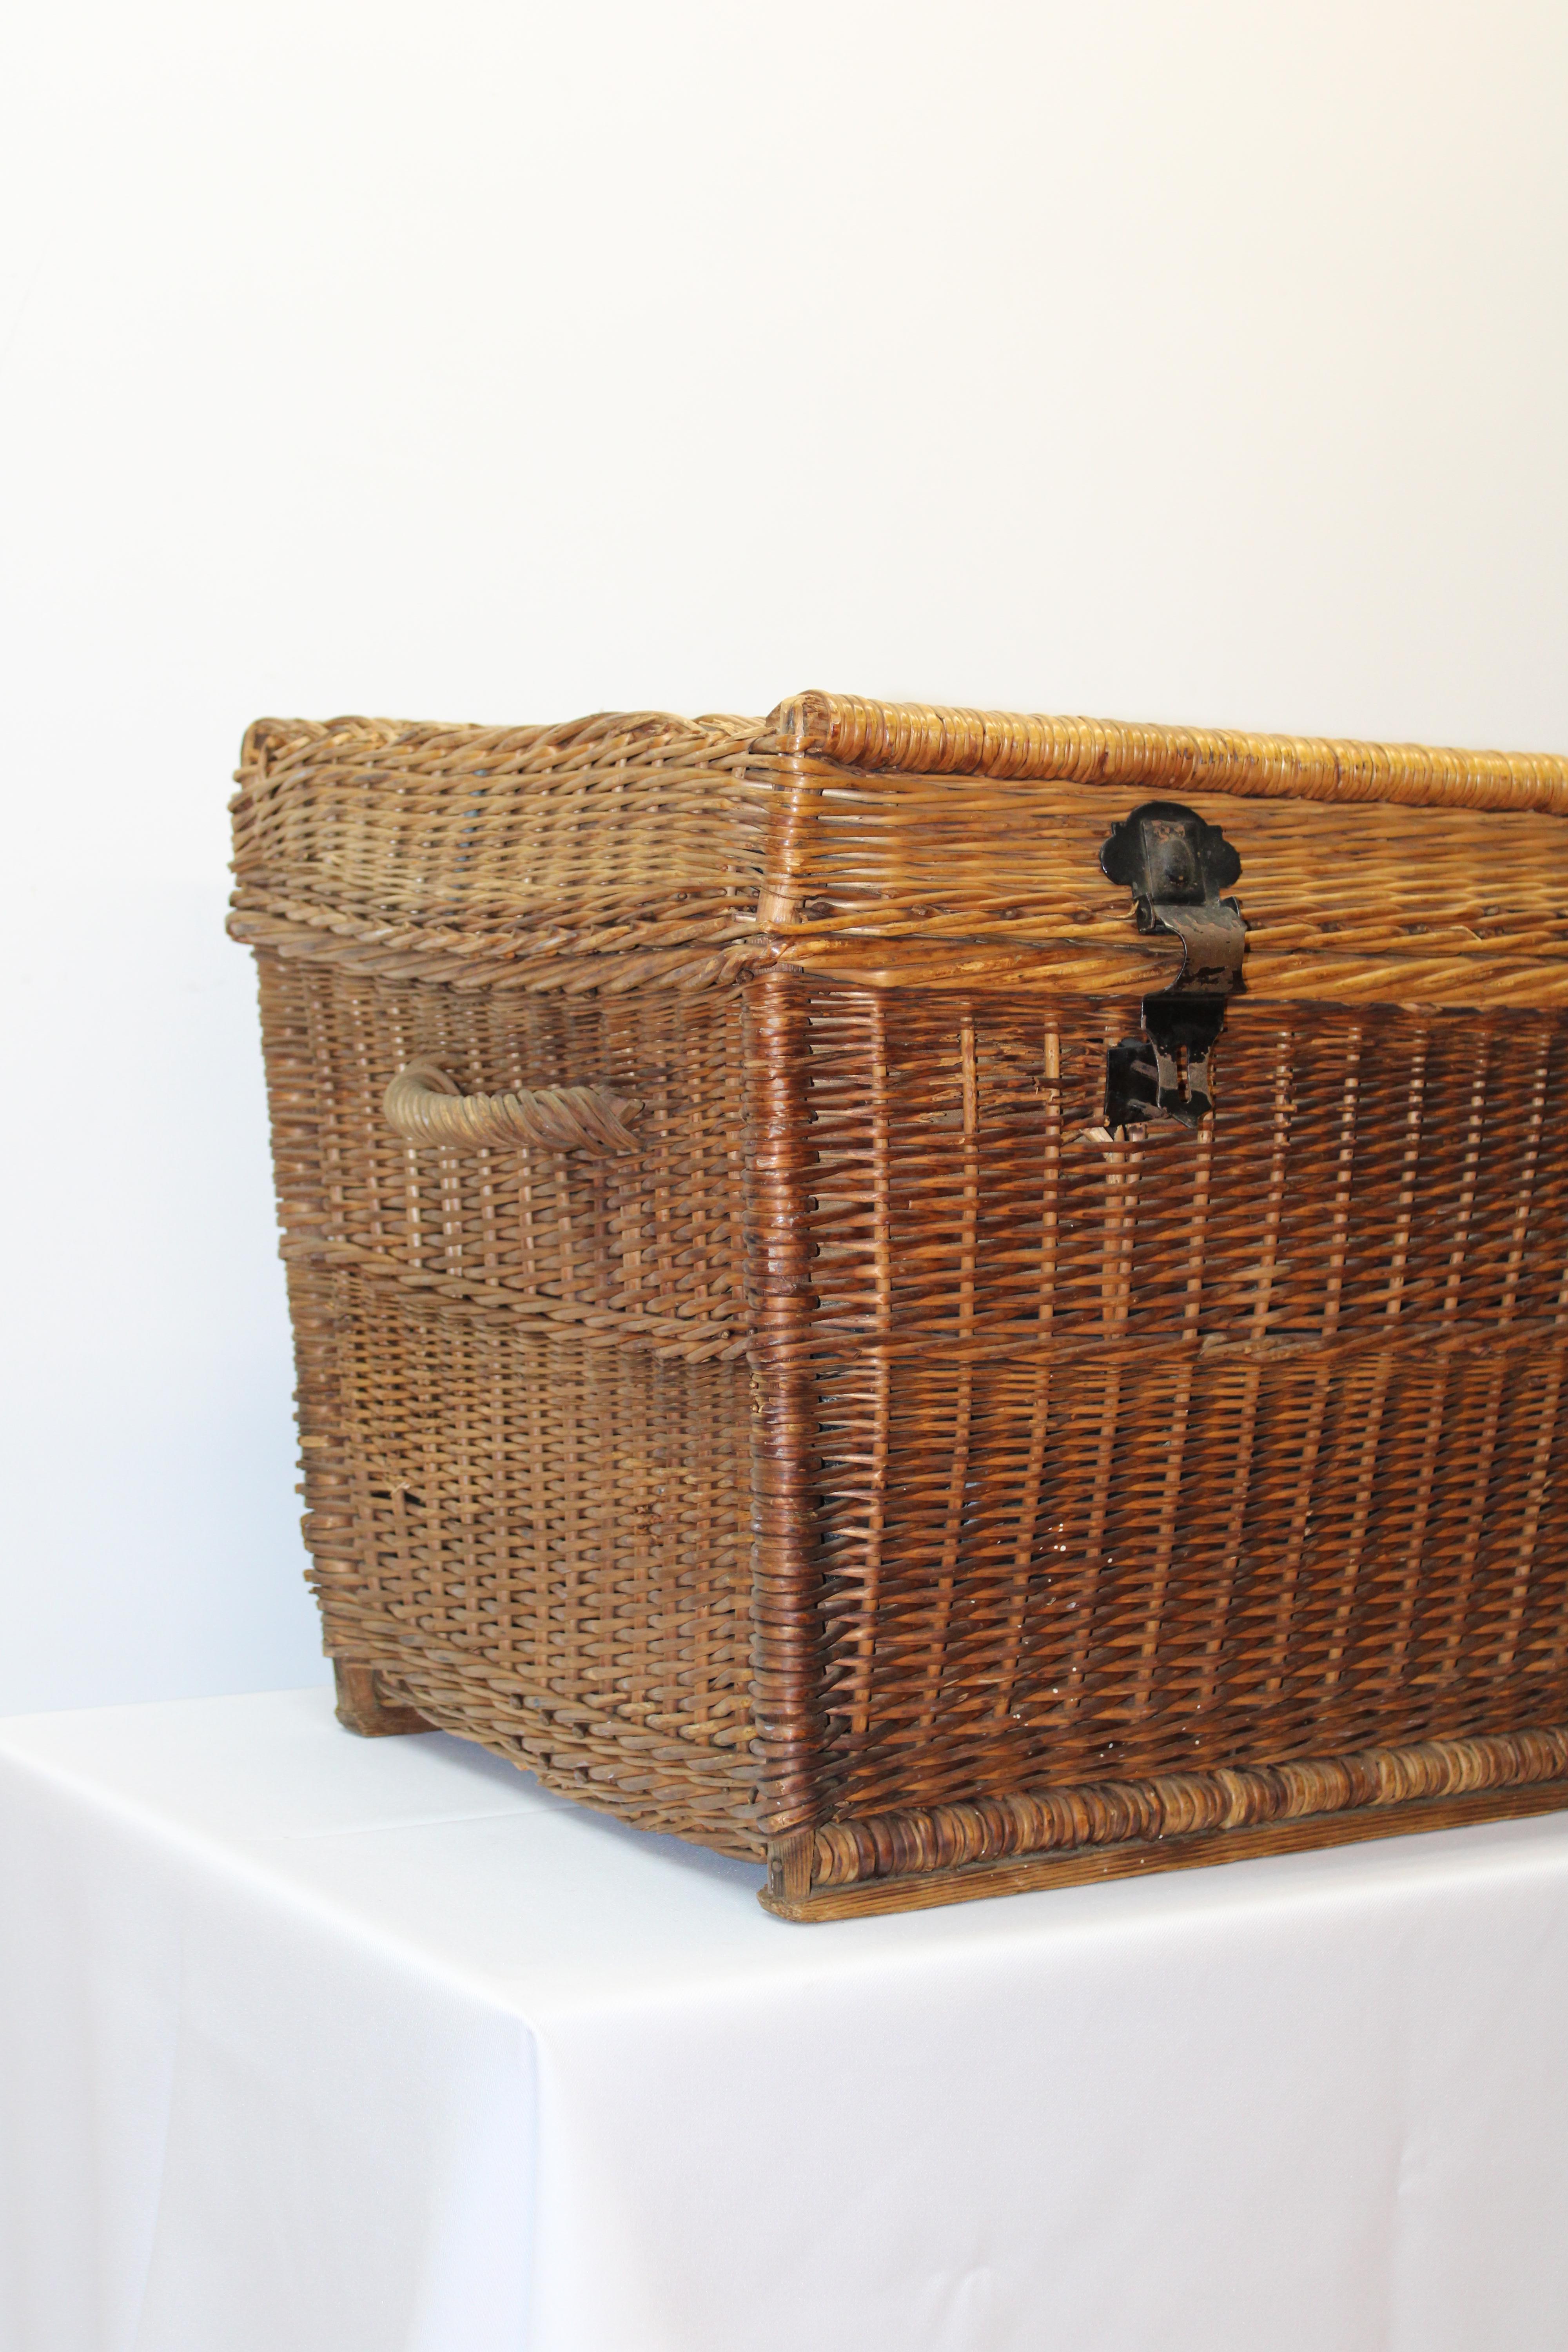 C. Late 19th century / early 20th century

Woven traveling fabric lined case / basket / picnic basket.